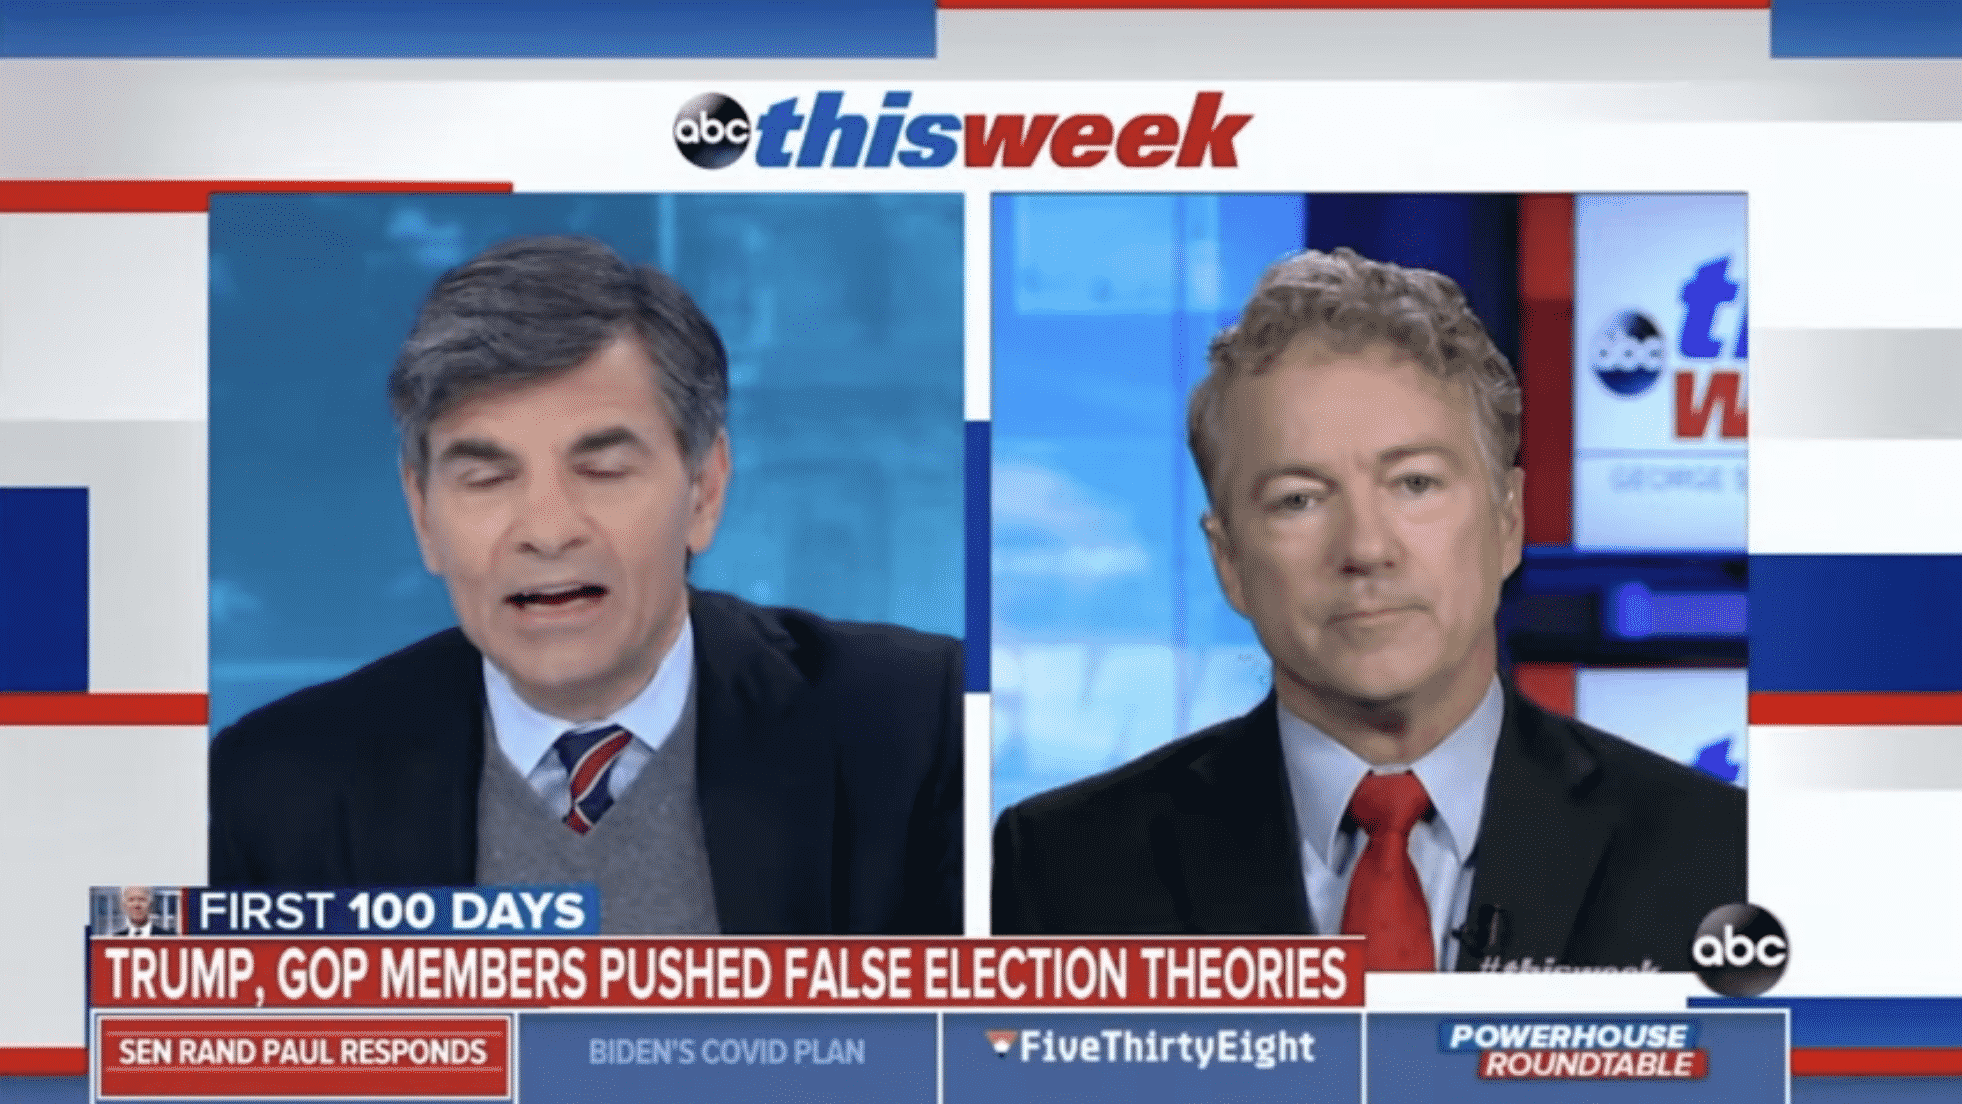 WATCH: Rand Paul Destroys ABC’s Stephanopoulos Over ‘Voter
Fraud Big Lie’ 1